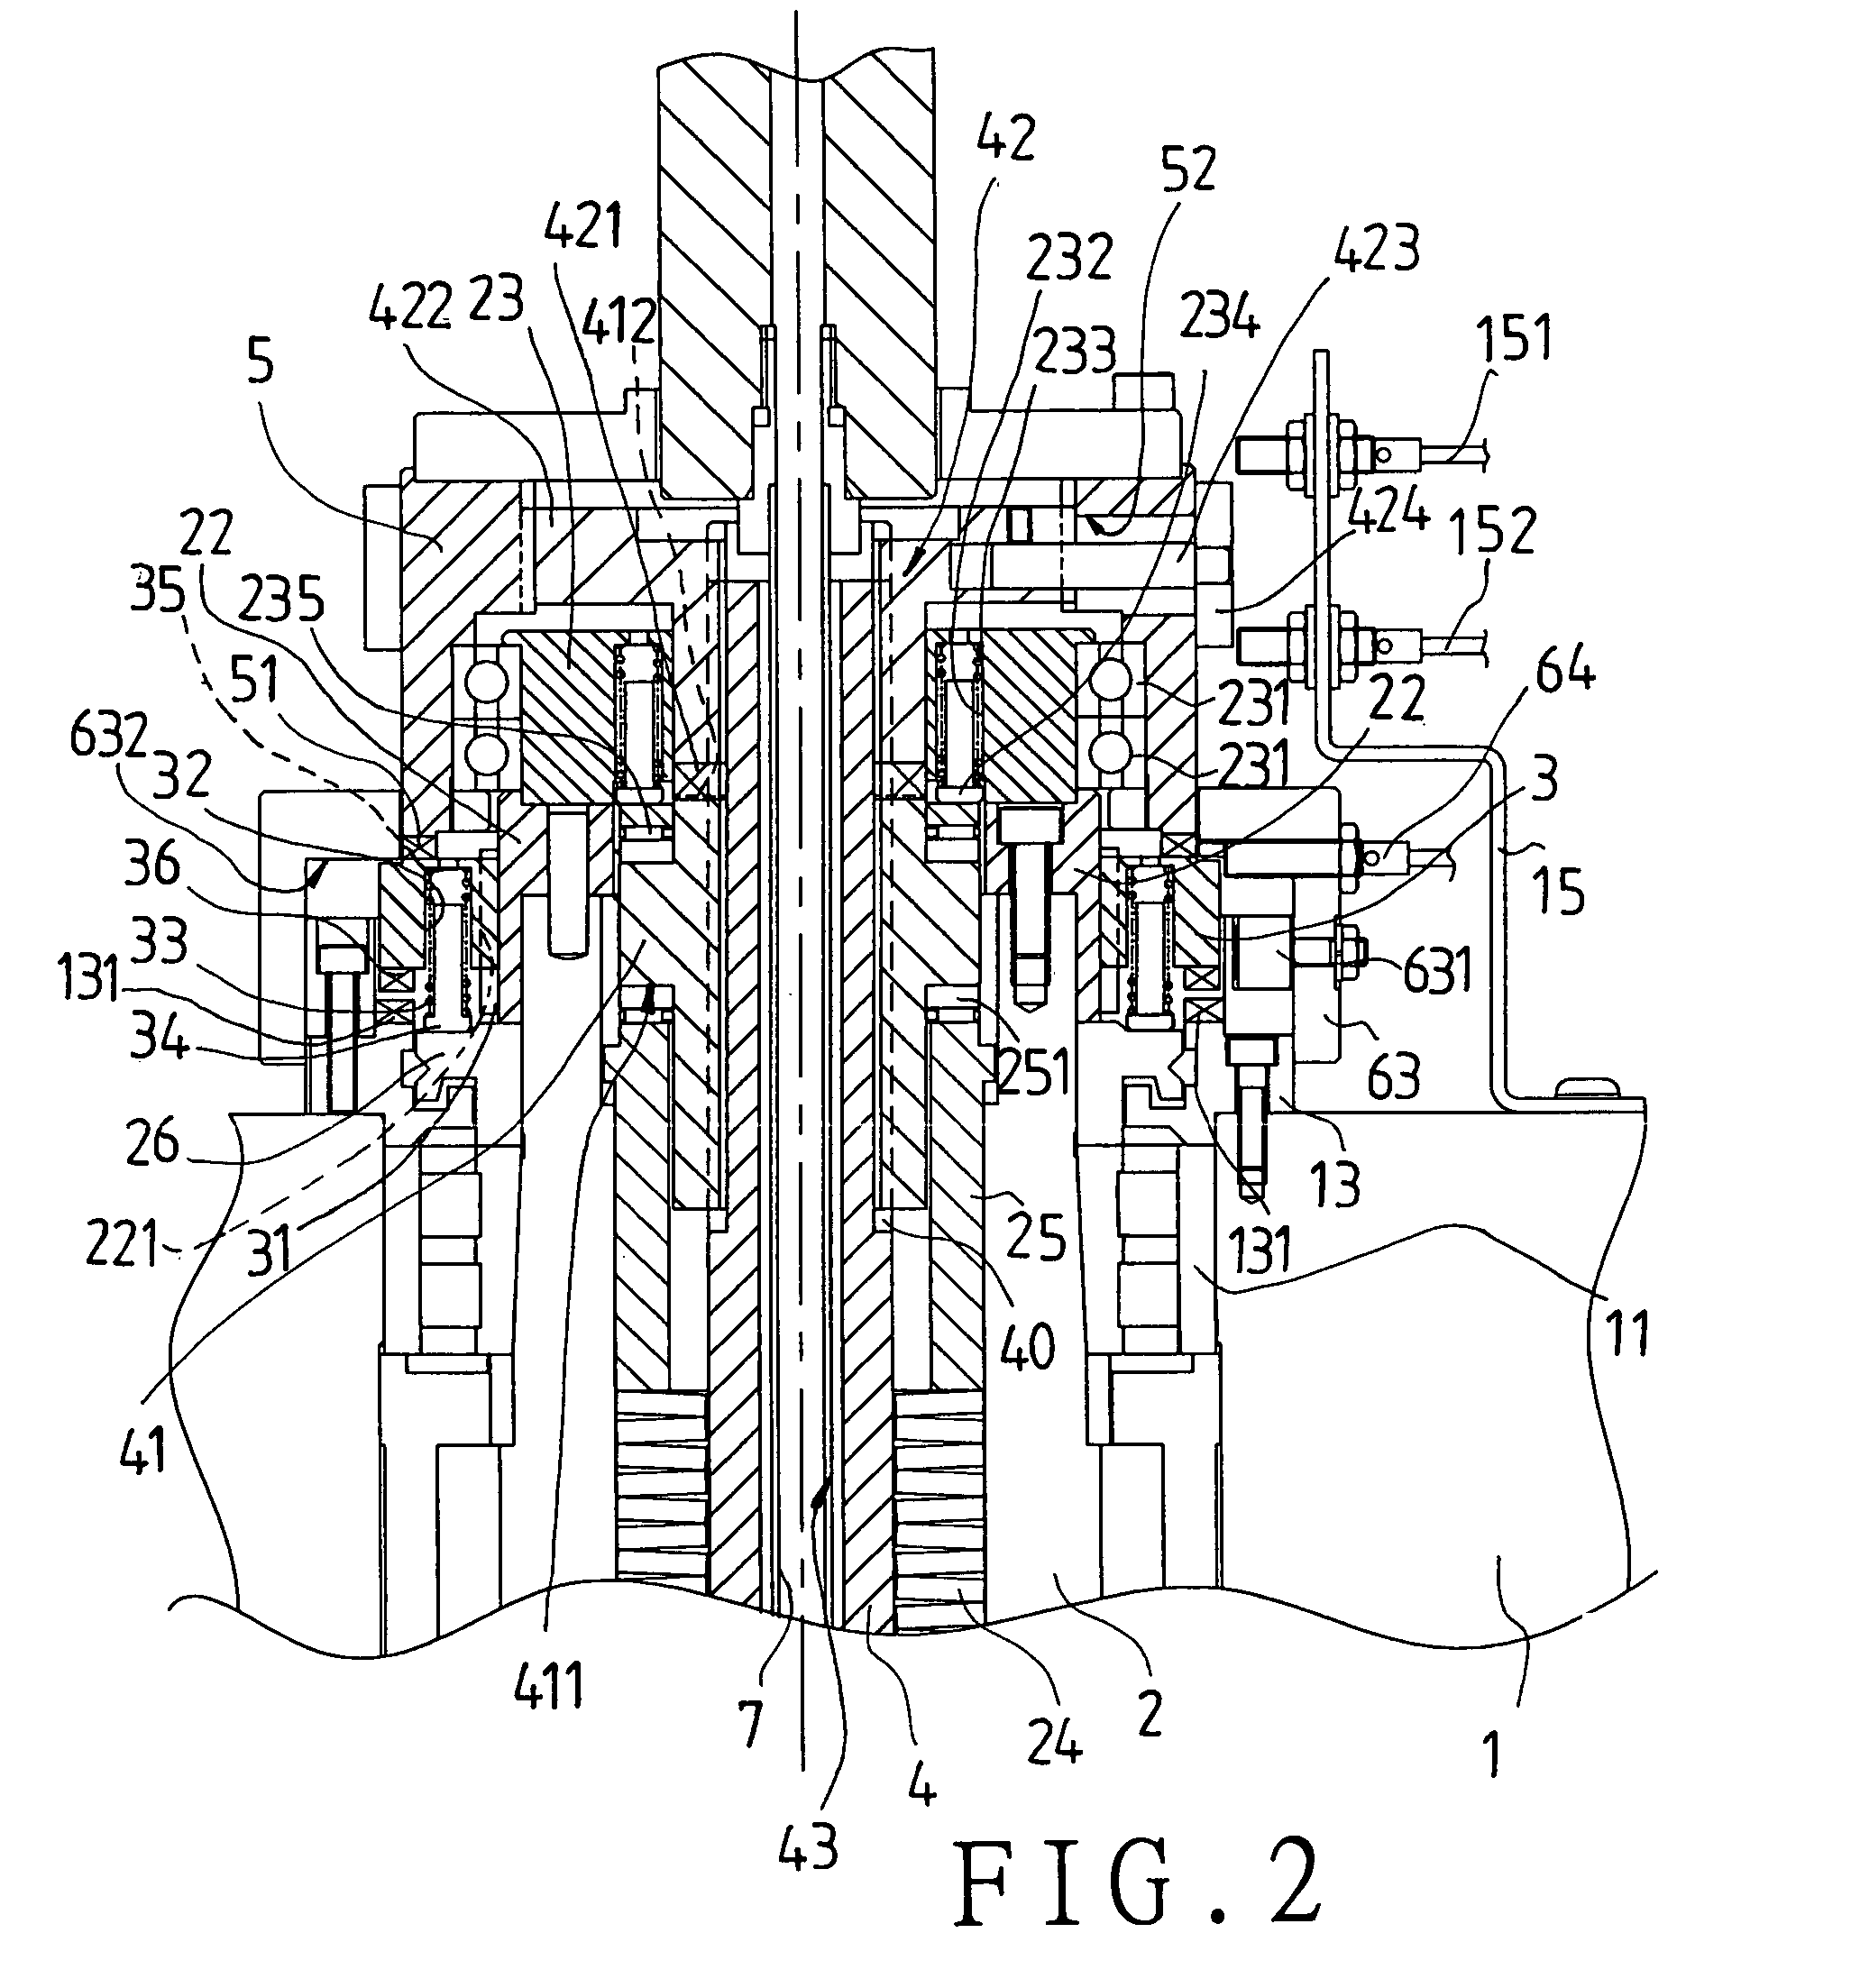 Structure of a spindle of a machining center